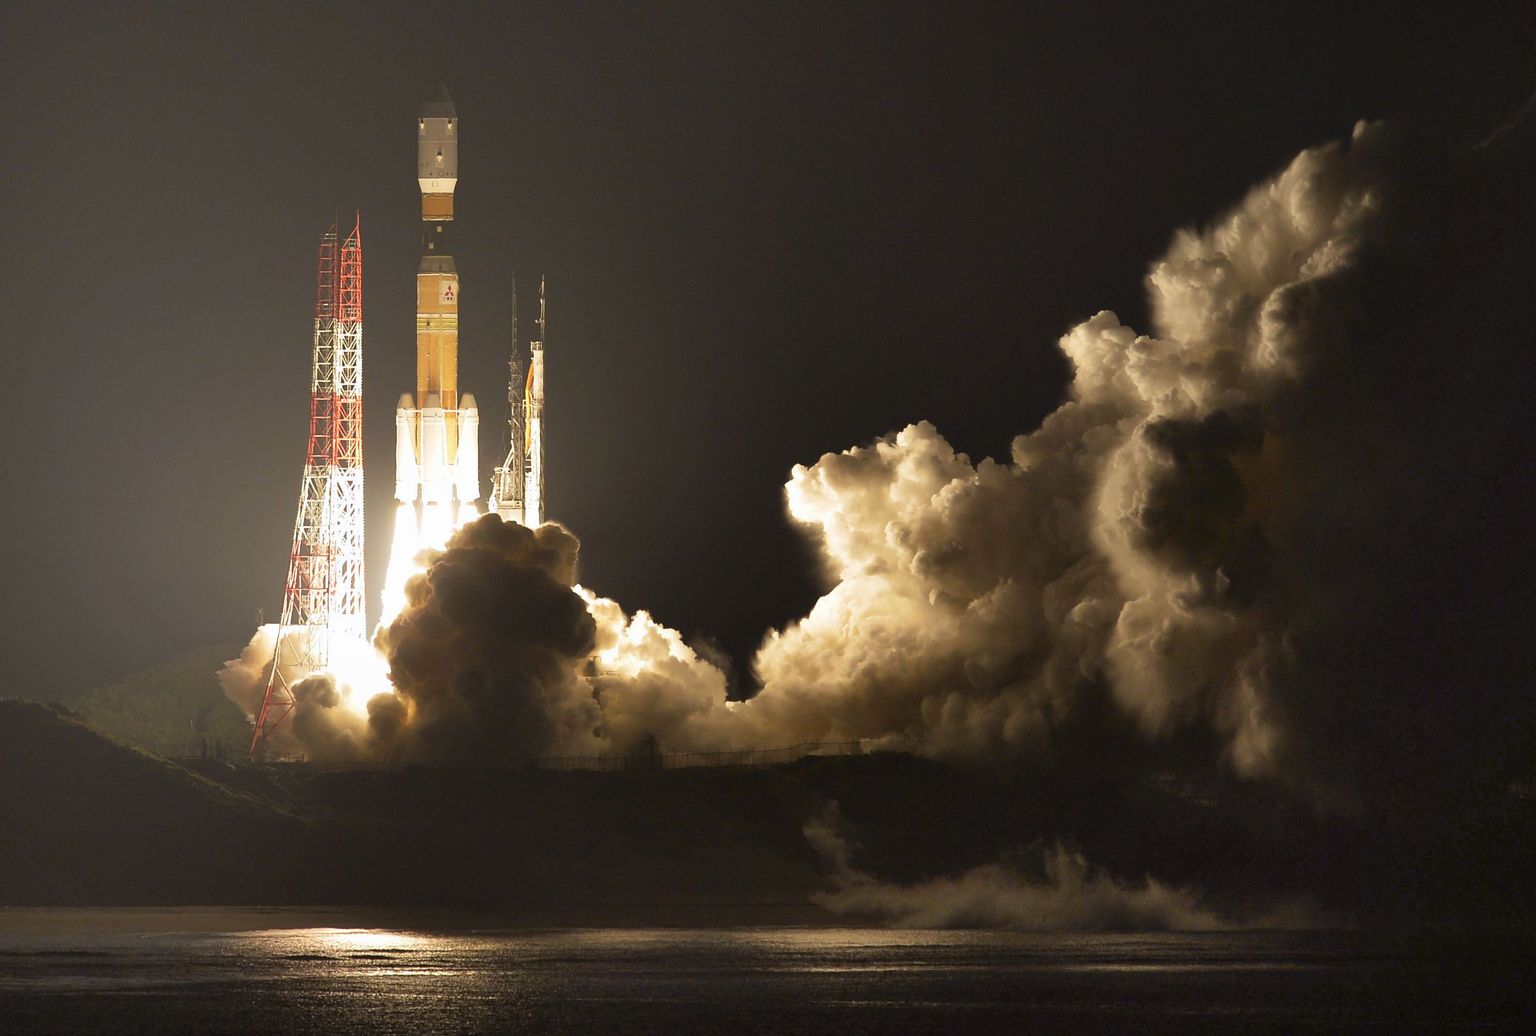 Japan's H-IIB rocket with a capsule called Kounotori, or stork, lifts off at the Tanegashima Space Center in Tanegashima, southern Japan, Friday evening, Dec. 9, 2016. The Japanese capsule contains nearly 5 tons of food, water and other supplies, including new lithium-ion batteries for the International Space Station